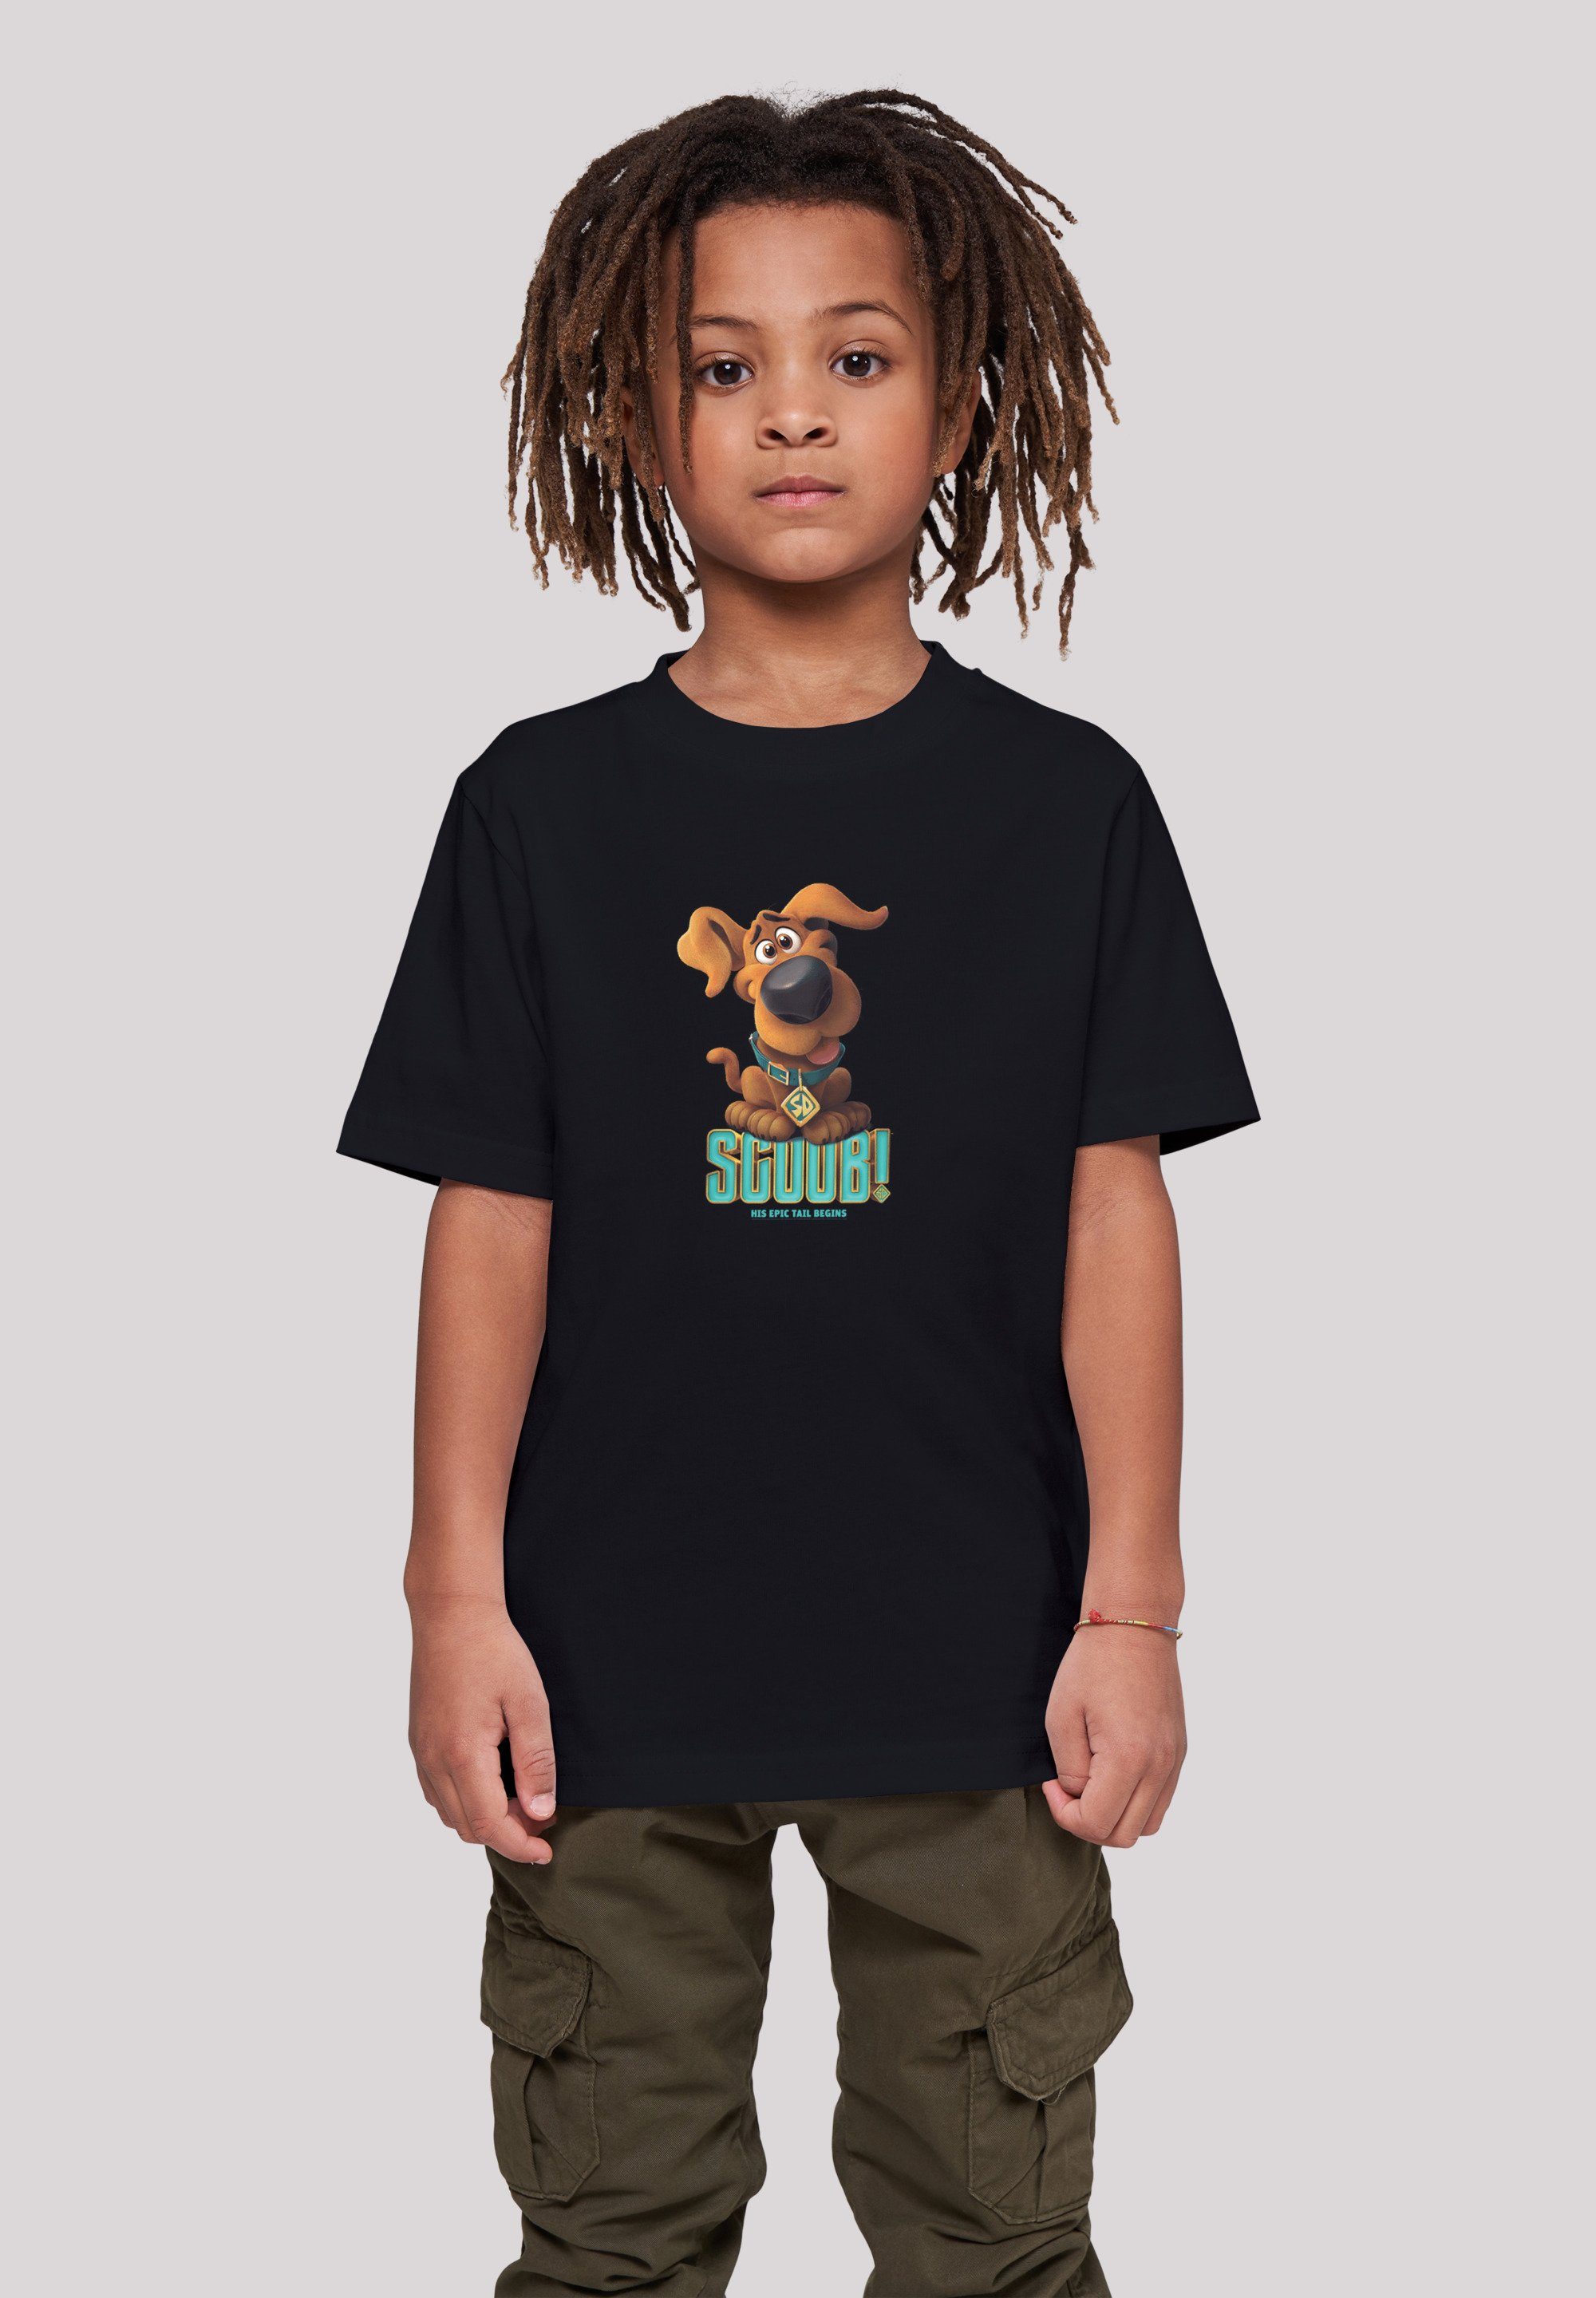 (1 Scooby Tee with Puppy Kurzarmshirt F4NT4STIC Kinder Kids Basic -tlg) Scooby Doo